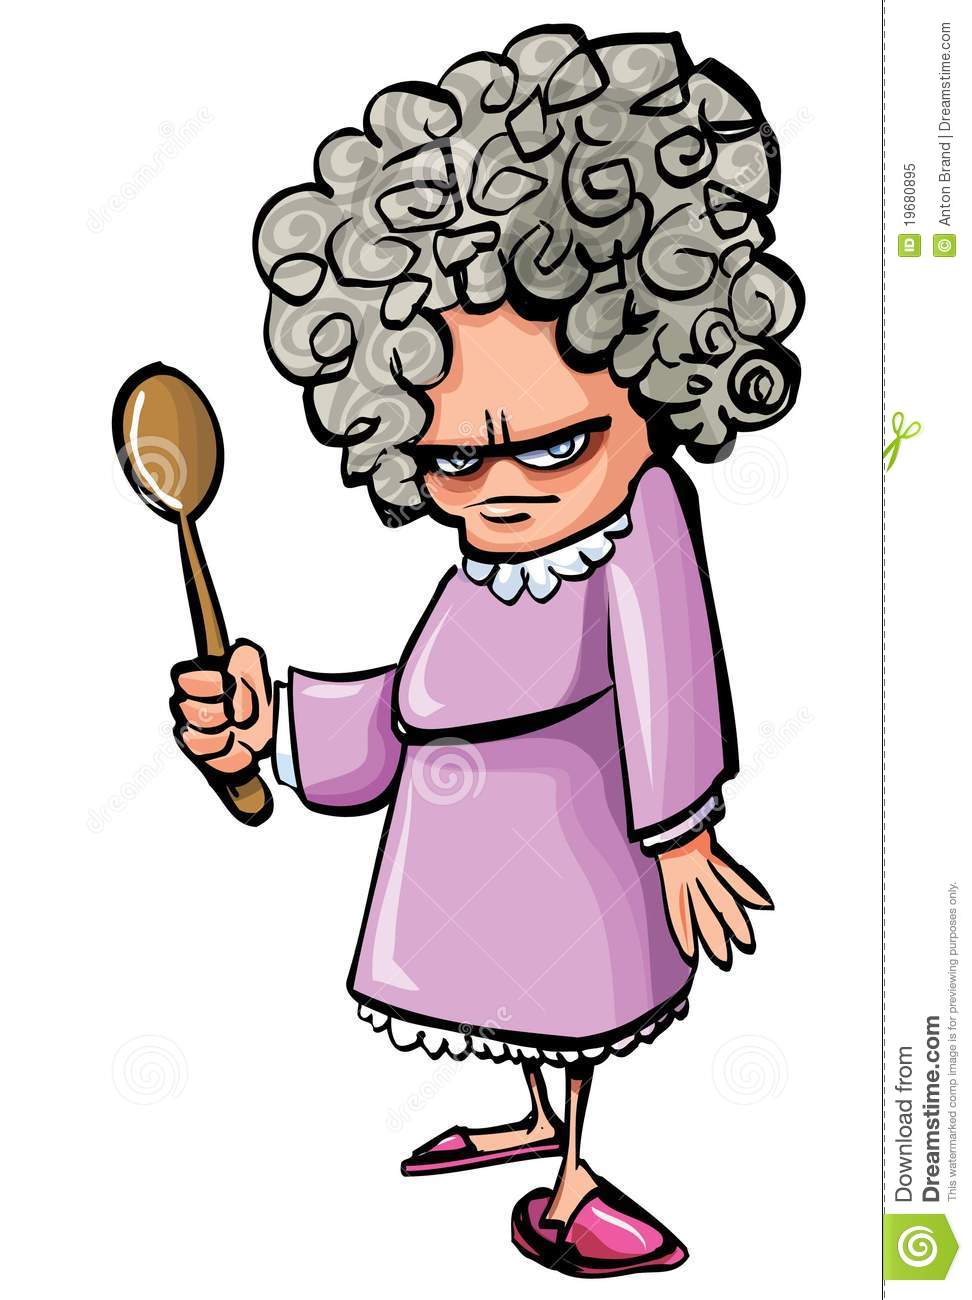 Cartoon Angry Old Woman With A Wooden Spoon Royalty Free Stock Photo